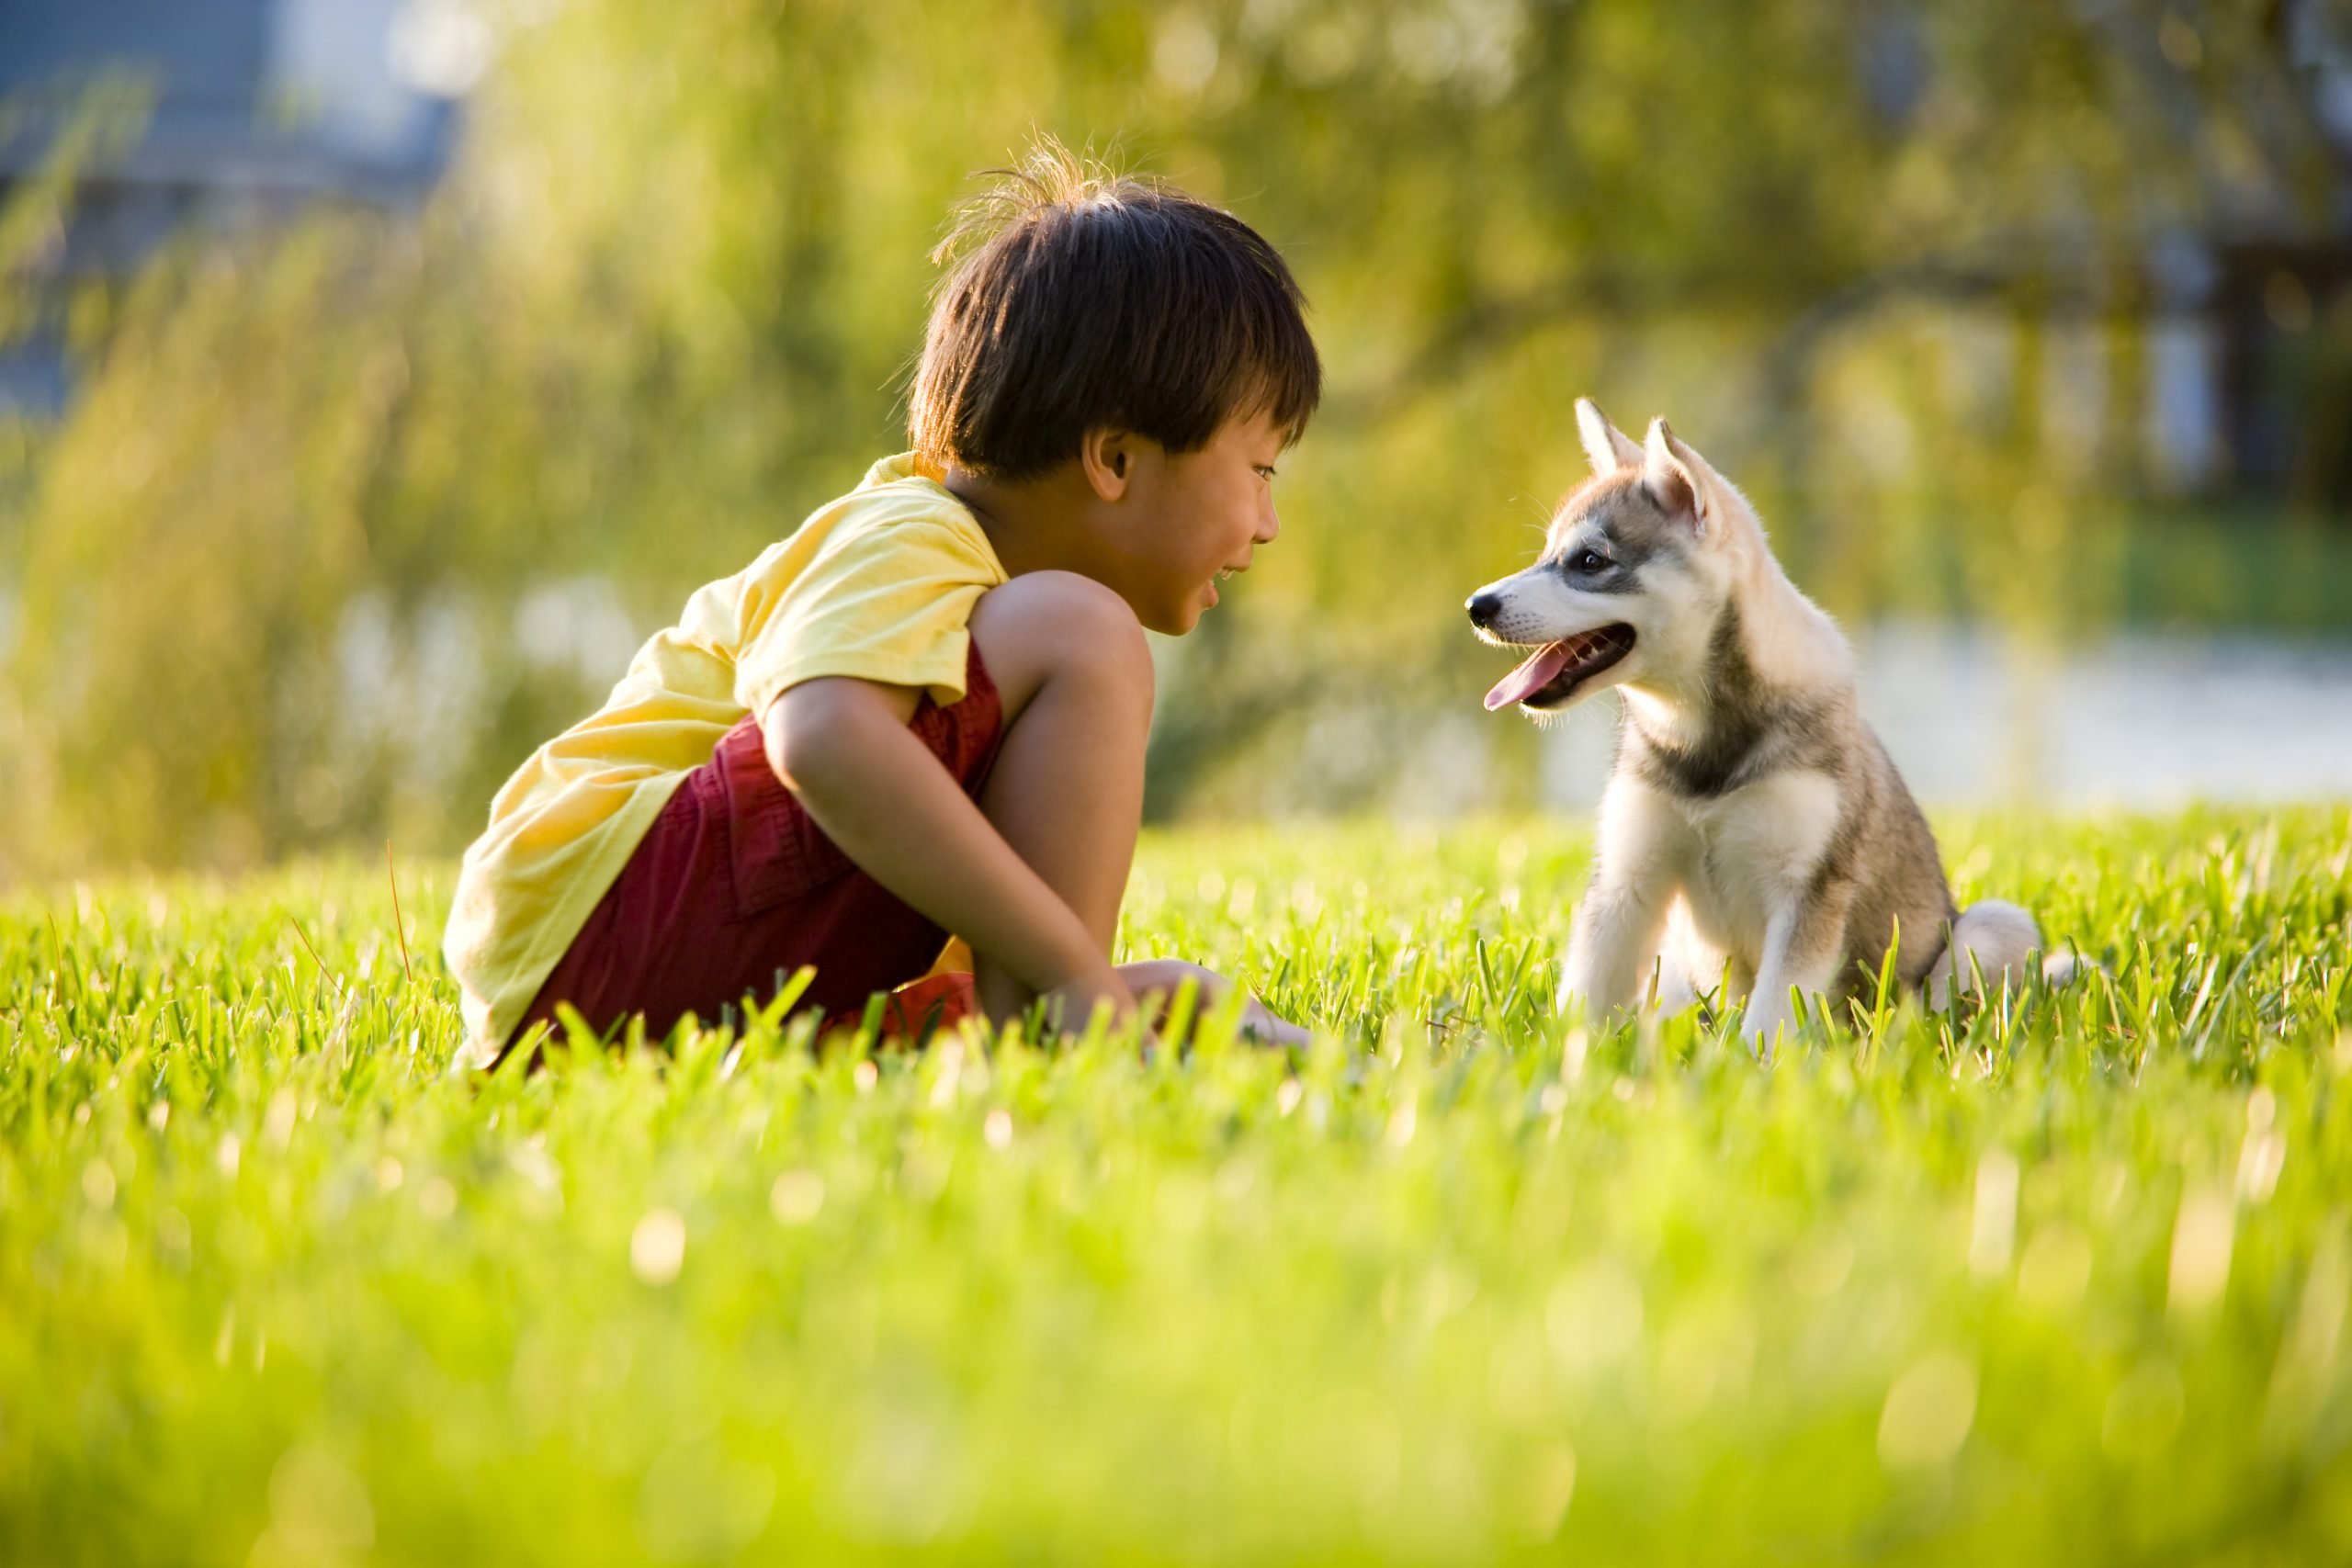 What To Do If Your Dog Bites a Child